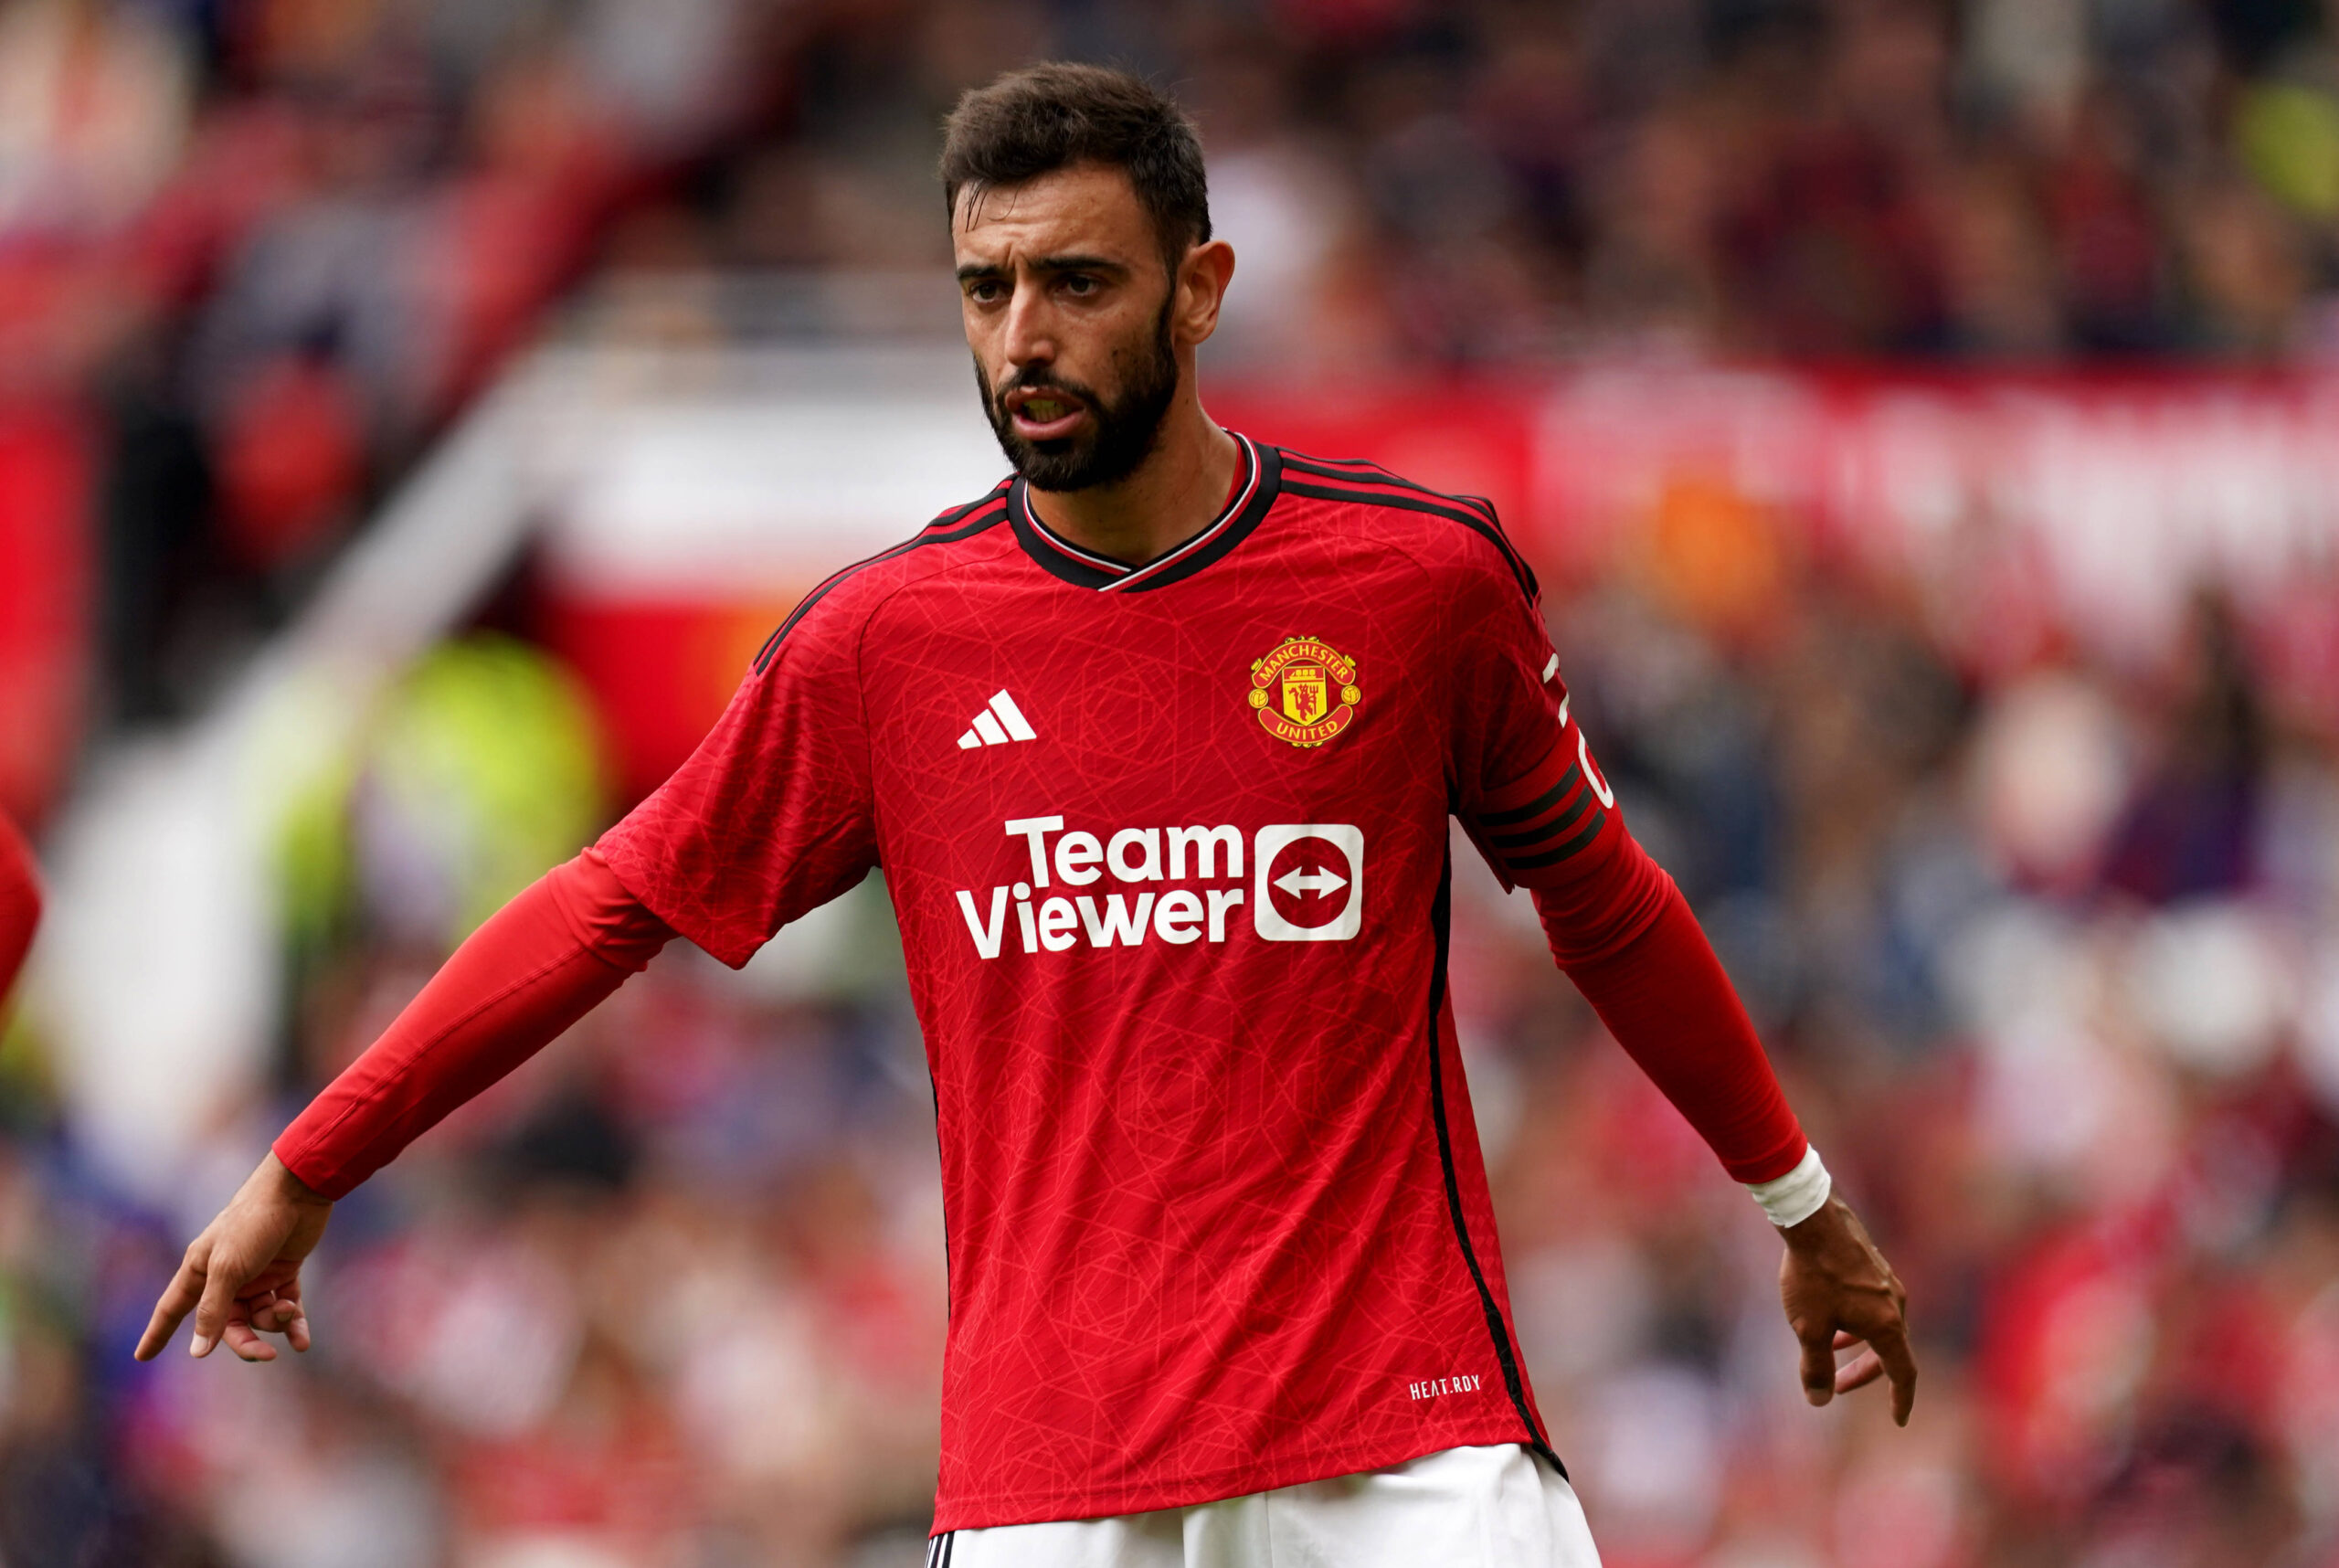 Bruno Fernandes On What Makes Him The Right Manchester United Captain